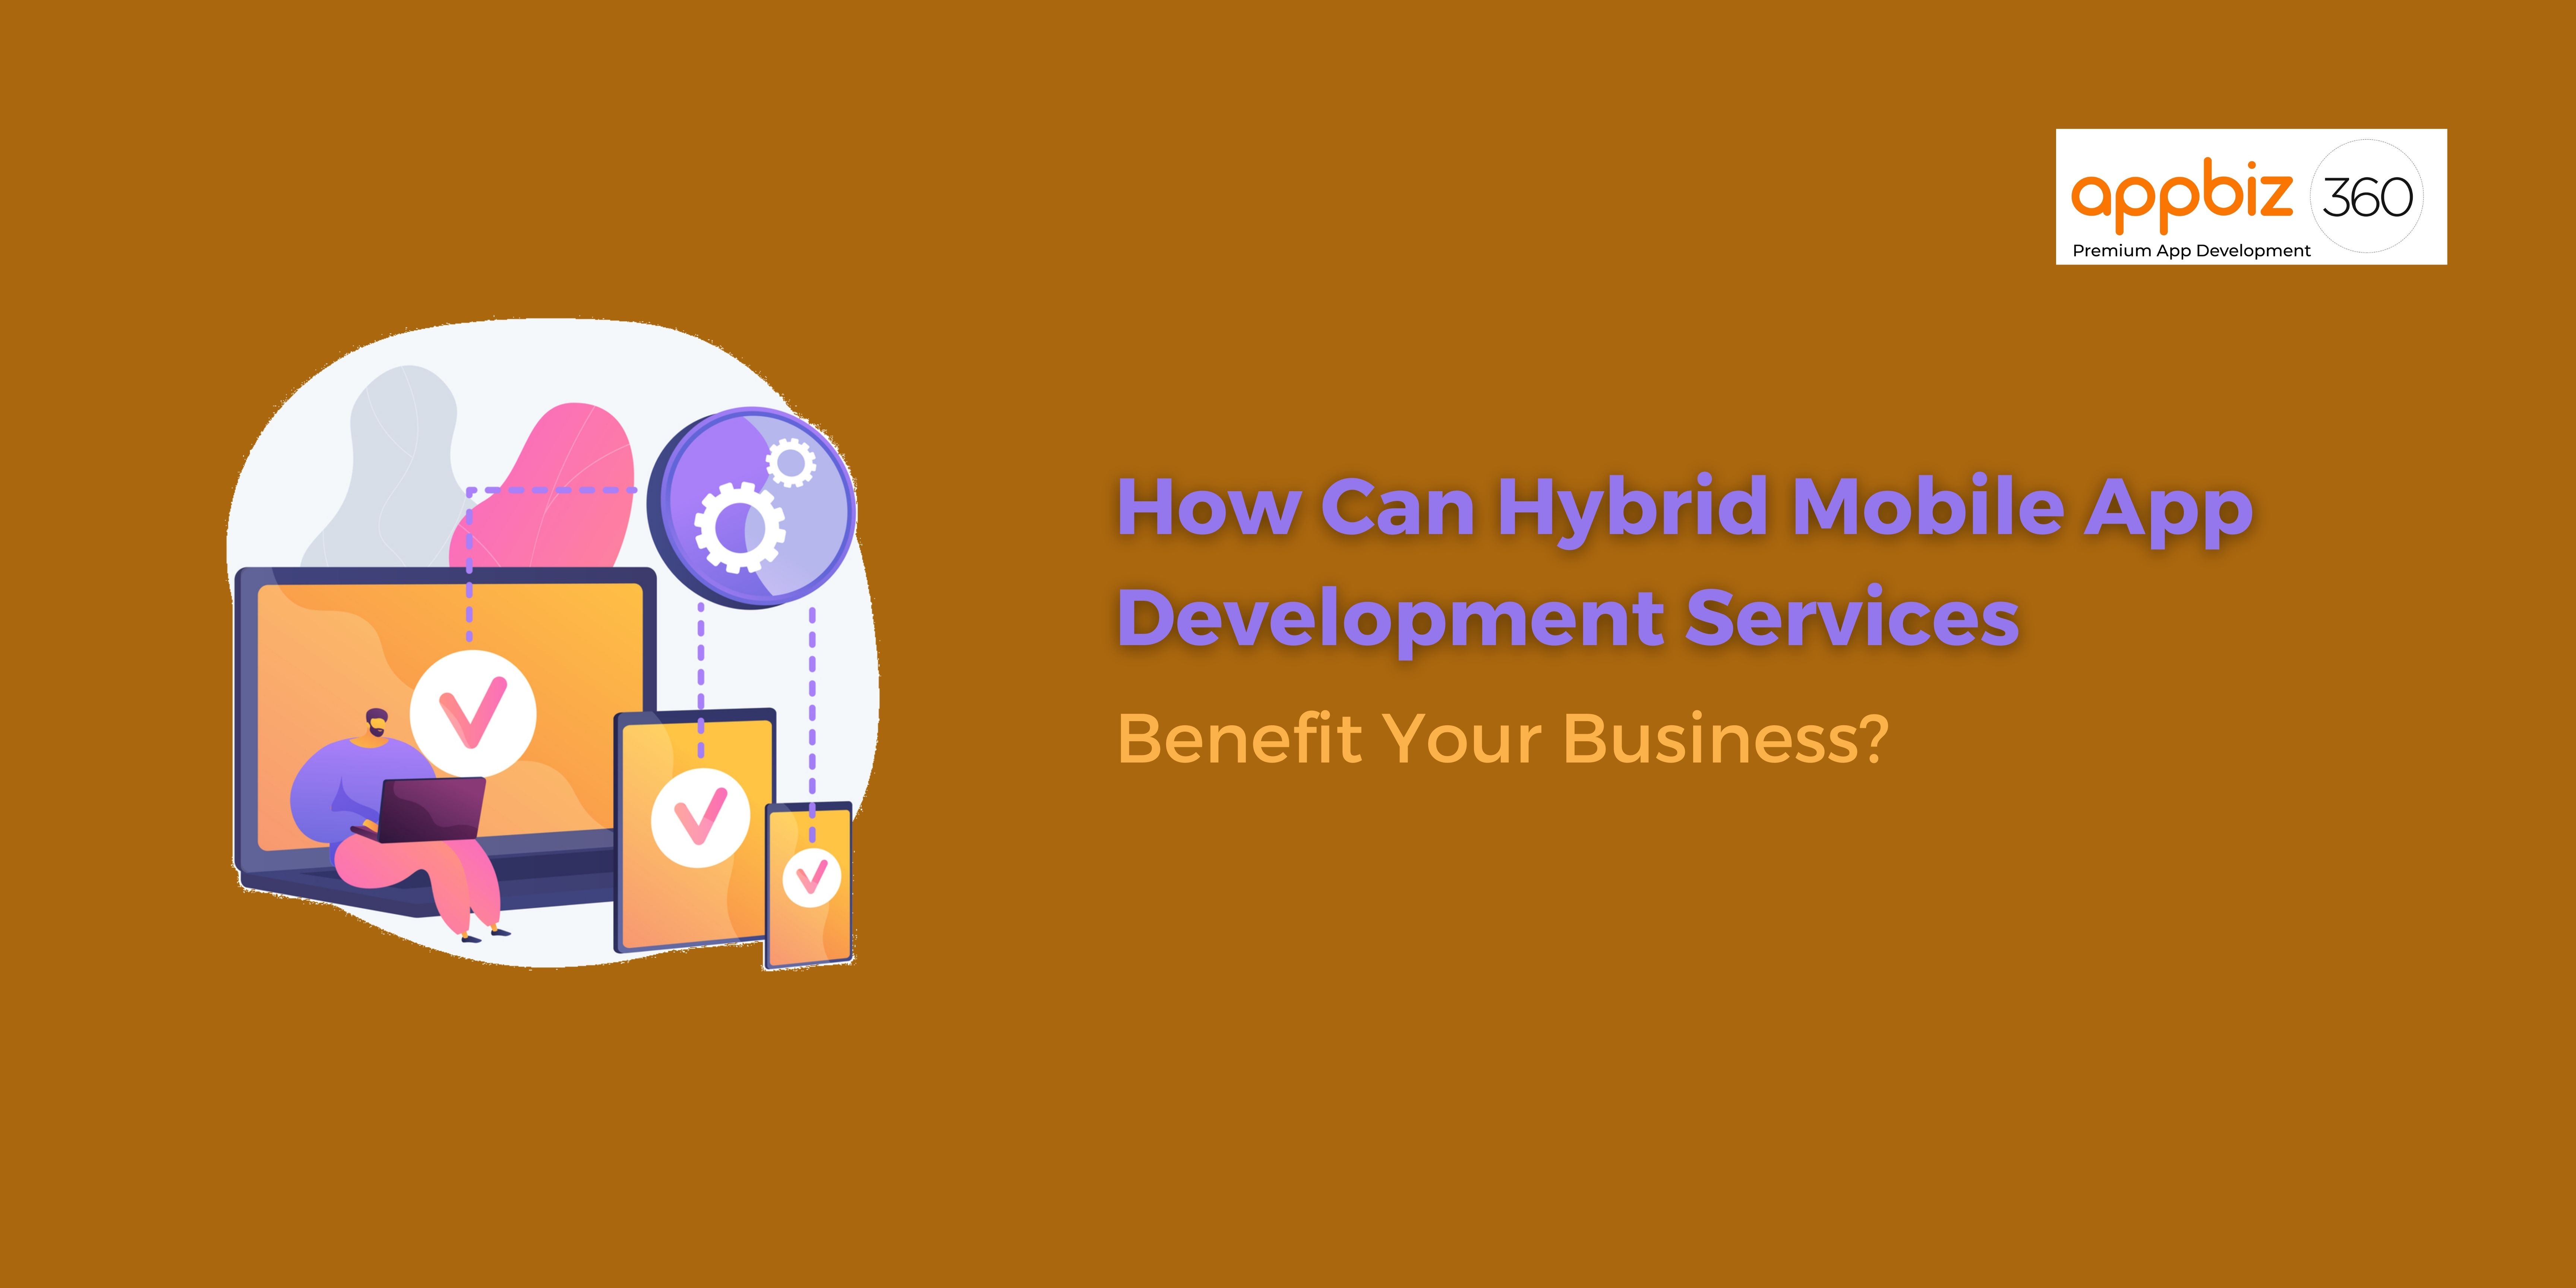 How Can Hybrid Mobile App Development Services Benefit Your Business?